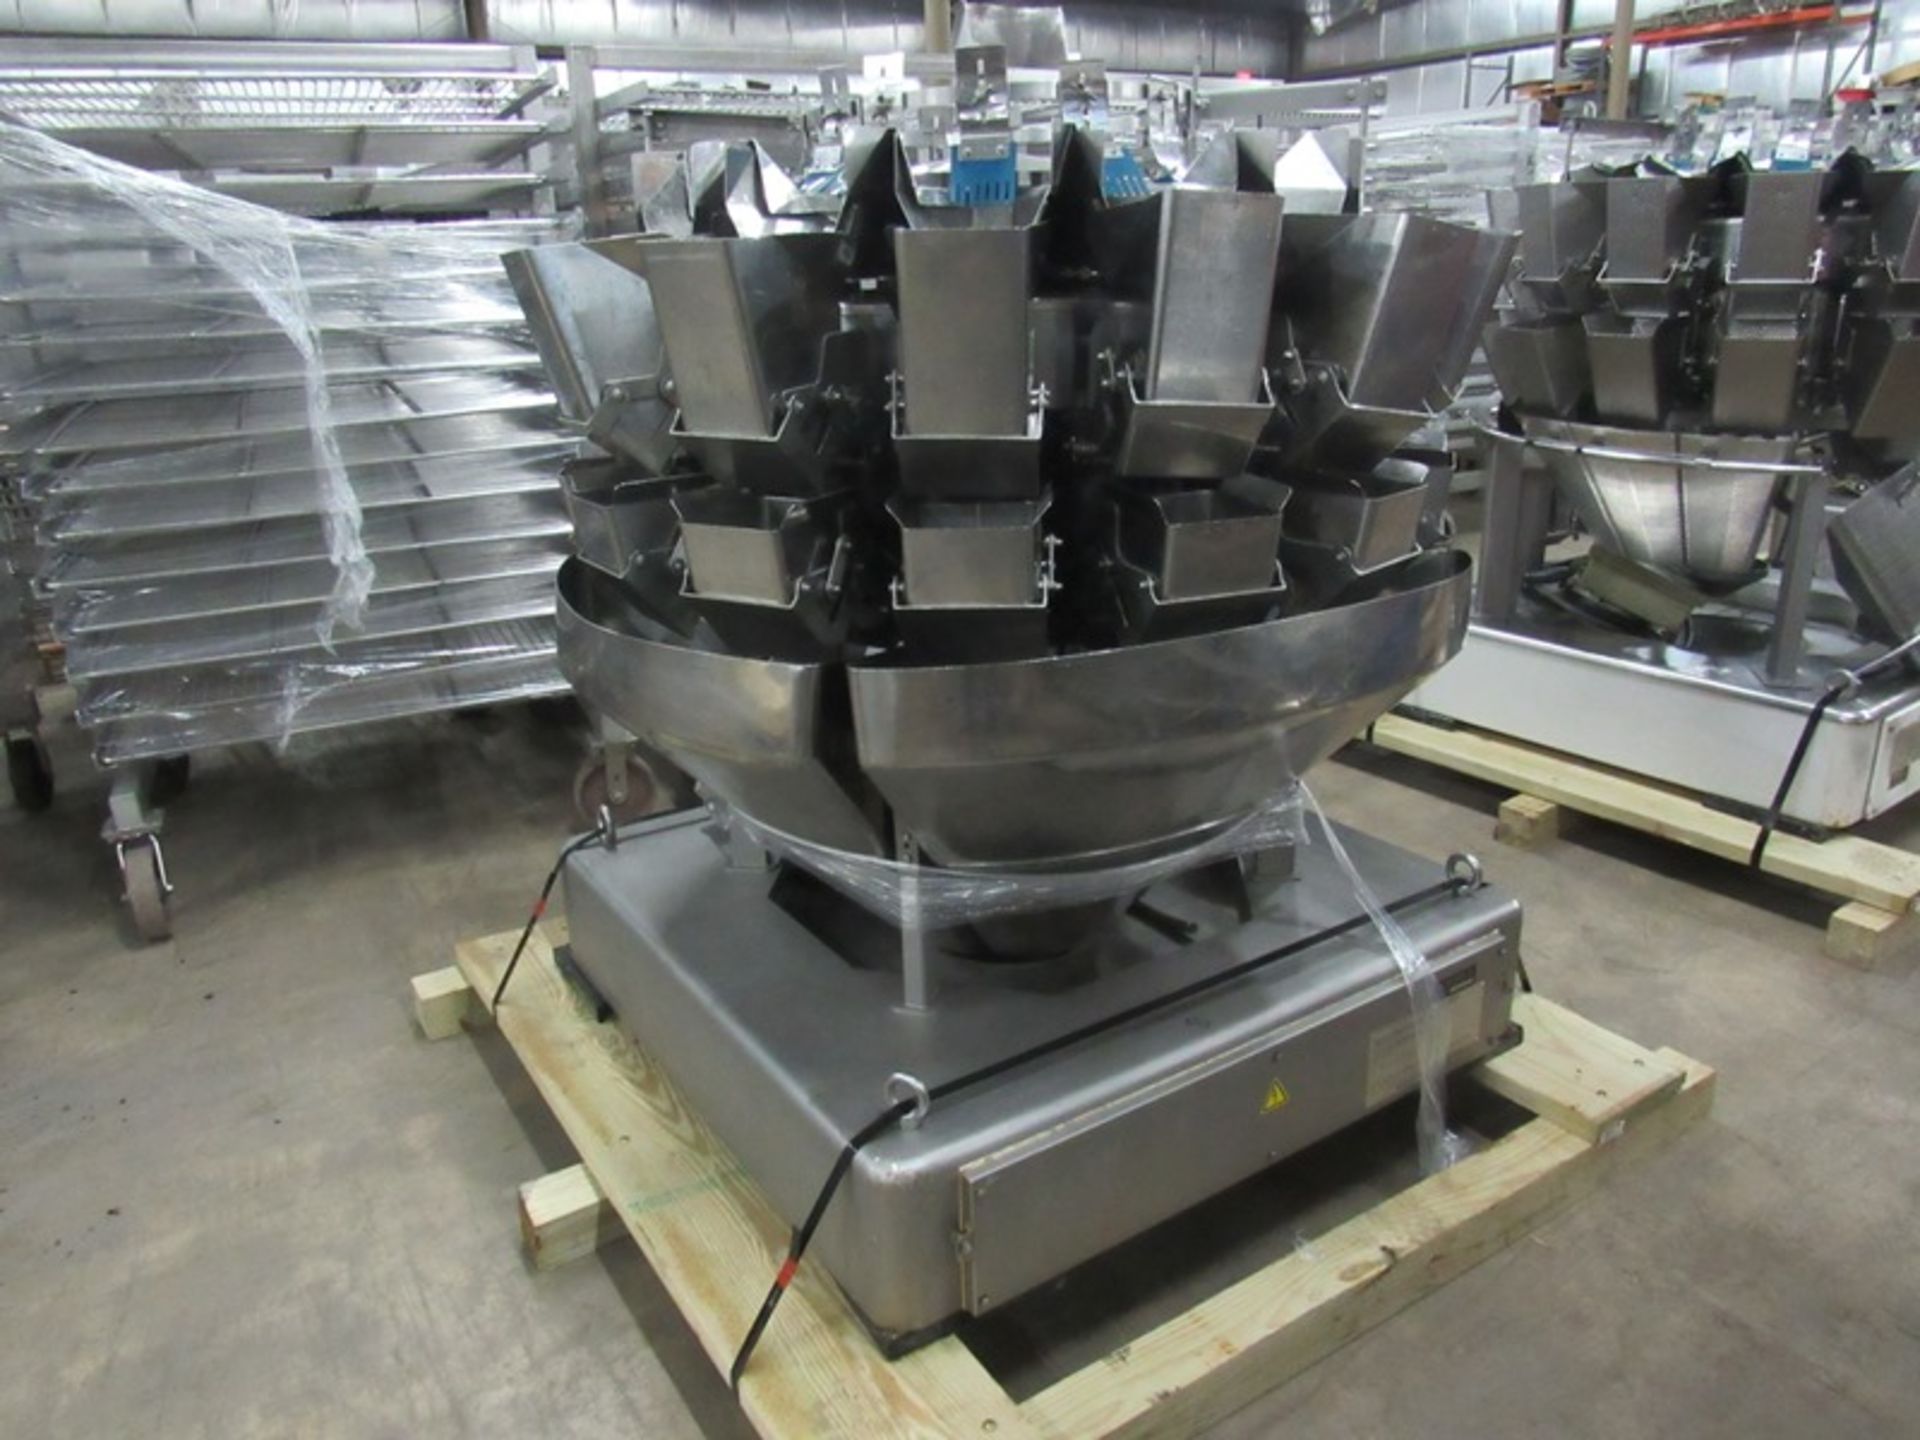 Ishida Mdl. CCW-NZ-214W-S/30-WP Stainless Steel 14 Smooth Bucket Scale, Ser. #40297, Mfg. 1999 with